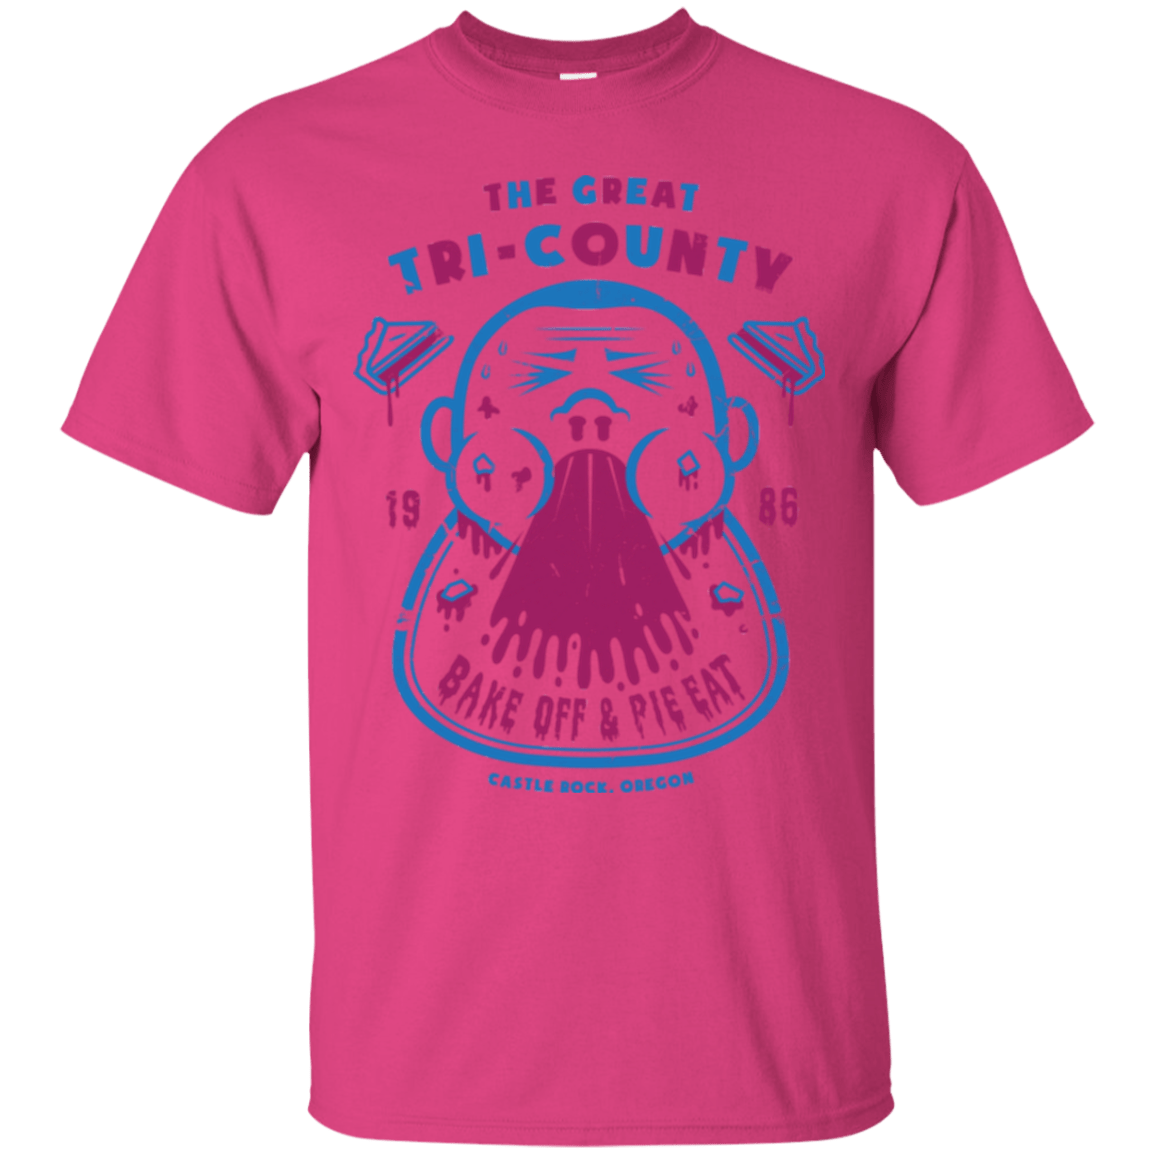 T-Shirts Heliconia / Small Tri County Pie Eating T-Shirt